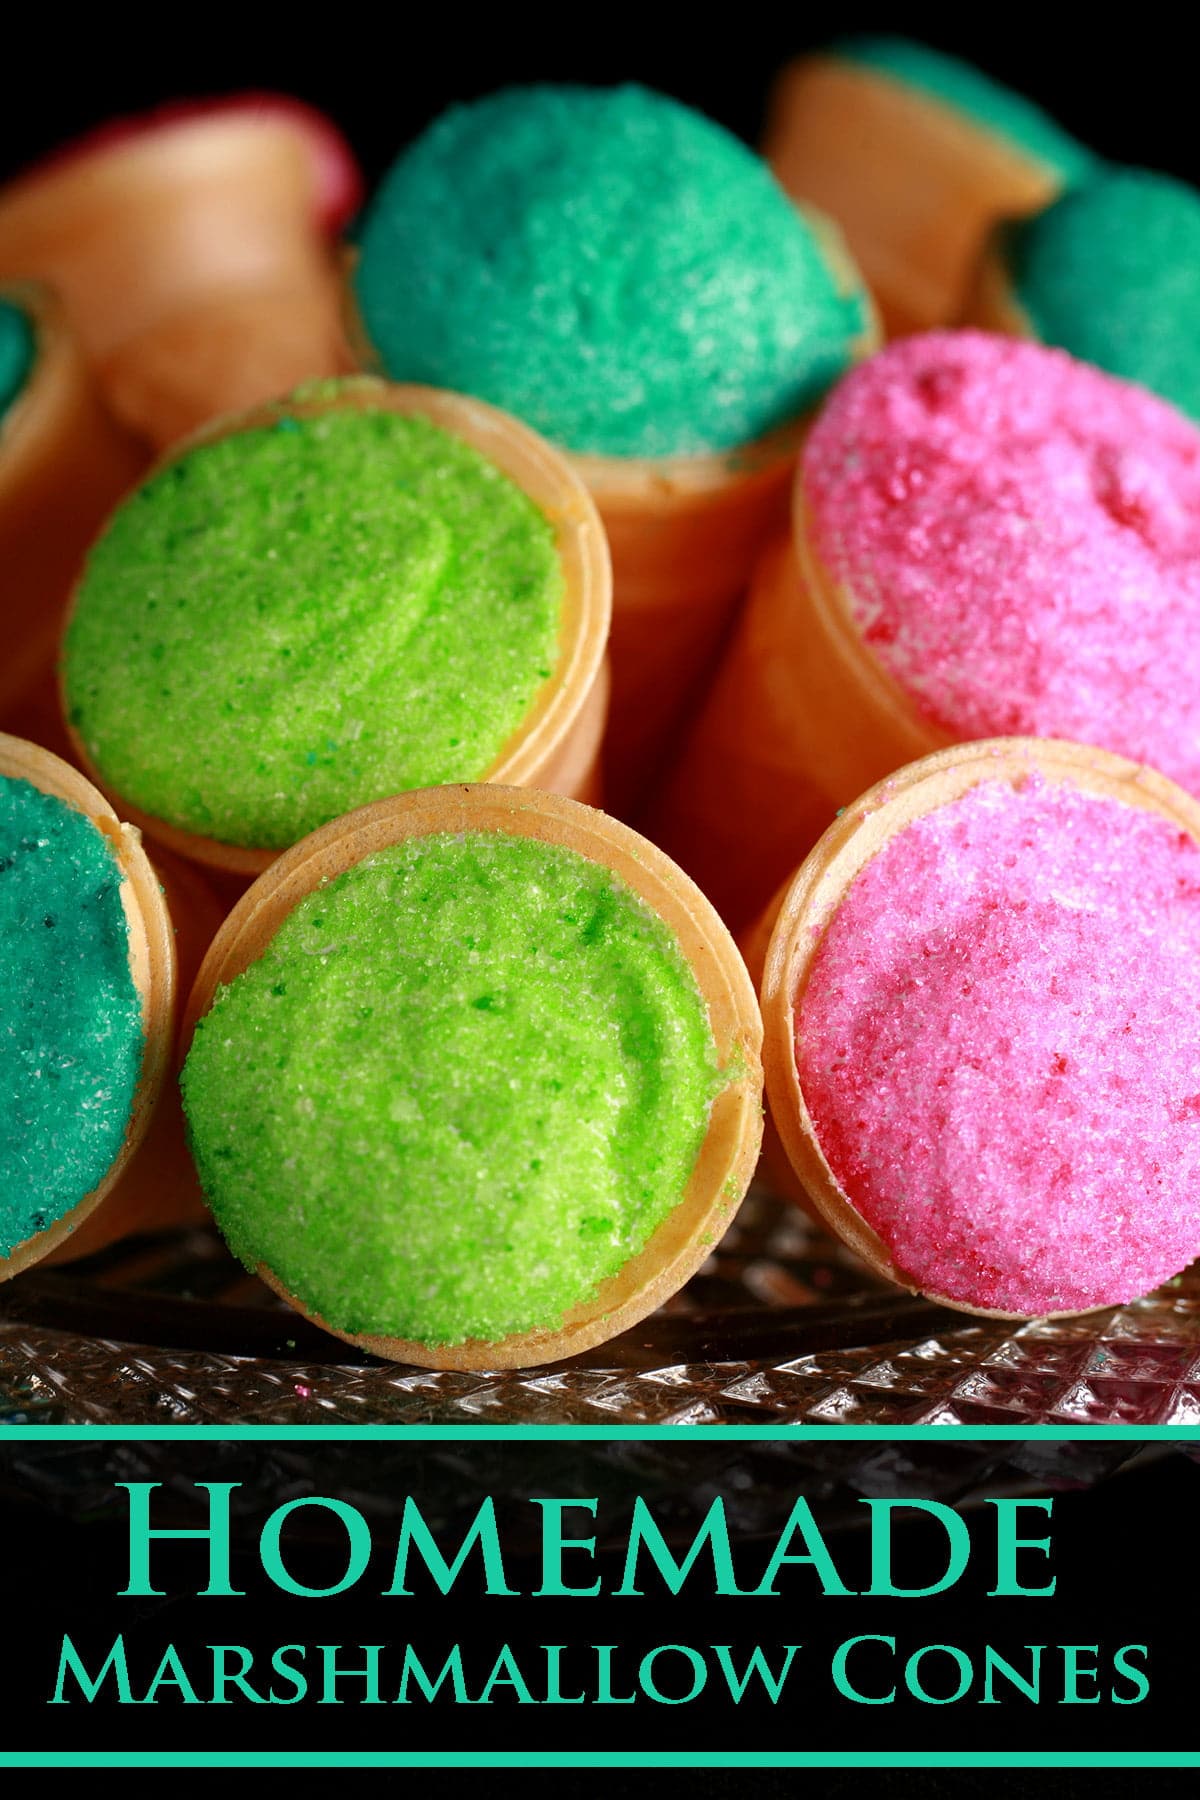 A pile of marshmallow cones - mini ice cream cones filled with marshmallow - are arranged on a plate. The exposed marshmallow of each is coated in colourful sugar - hot pink, lime green, and teal.